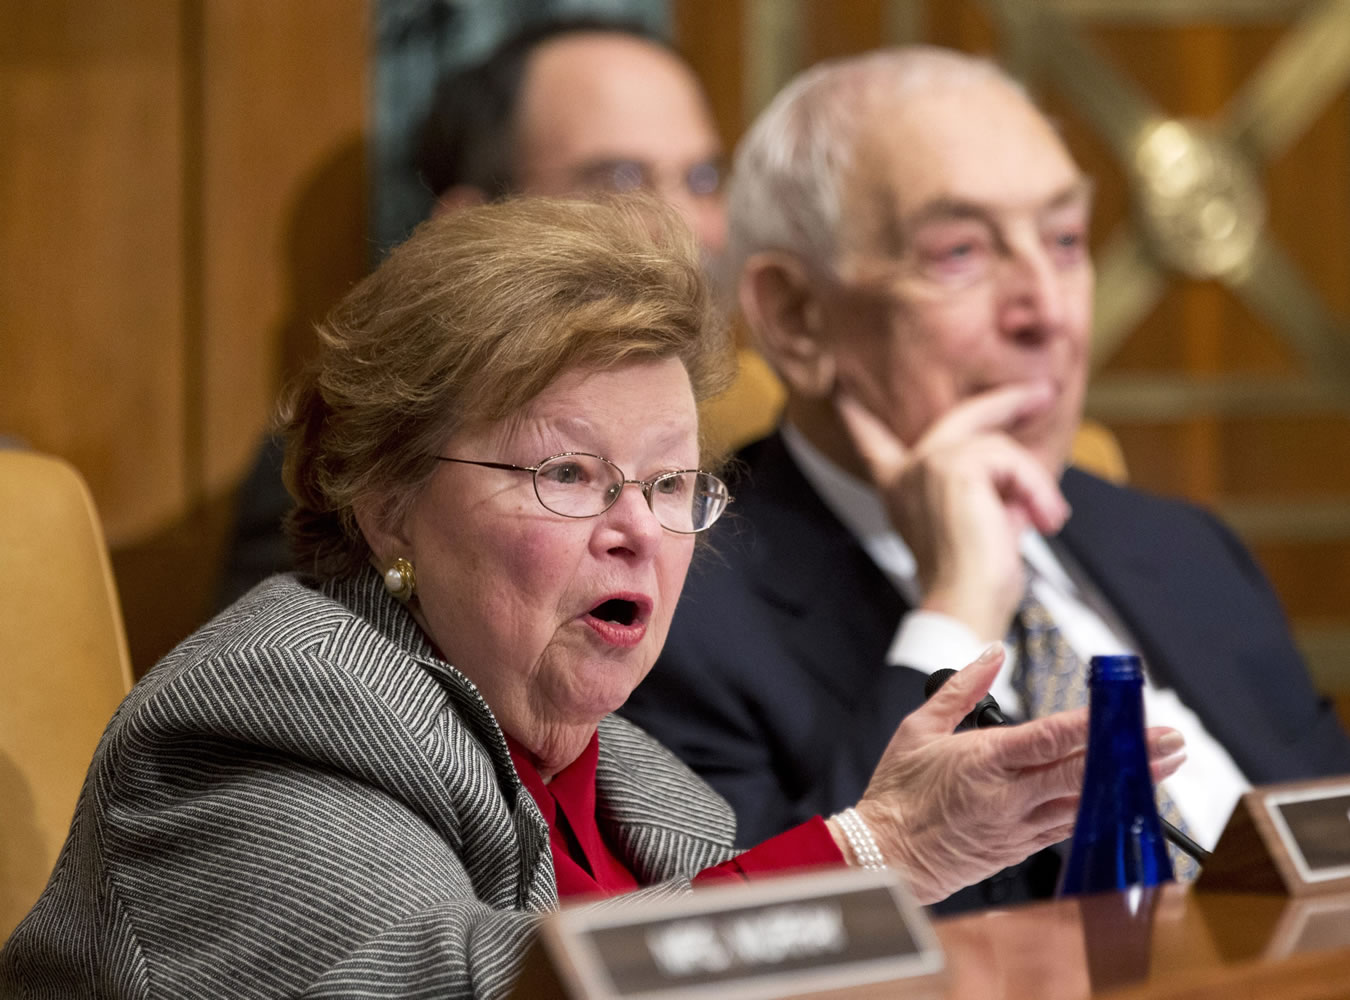 Senate Appropriations Committee member Sen. Barbara Mikulski, D-Md., left, speaks on Capitol Hill in Washington. Mikulski is one of two U.S. senators among the critics calling for greater accountability in sexual assault cases for Naval Academy Superintendent Vice Adm.